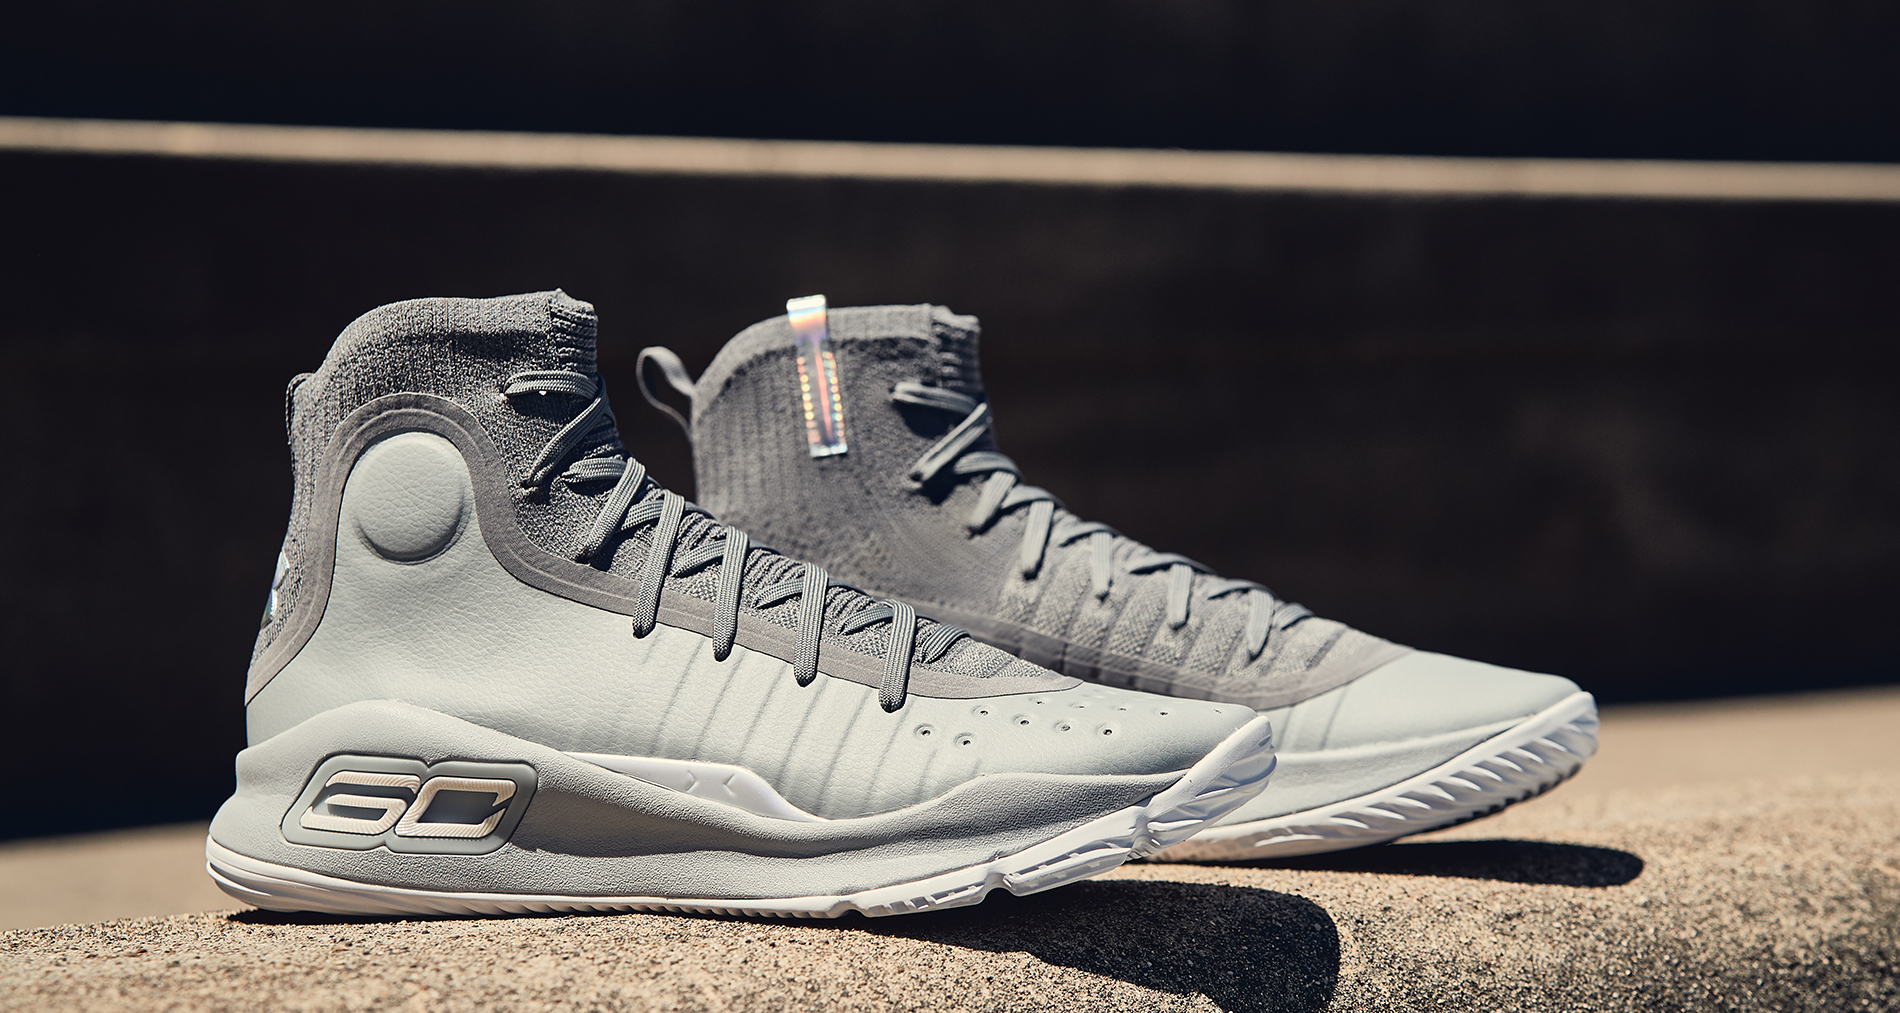 Ostentoso Amigo semestre Under Armour Curry 4 "More Buckets" Drops This Weekend